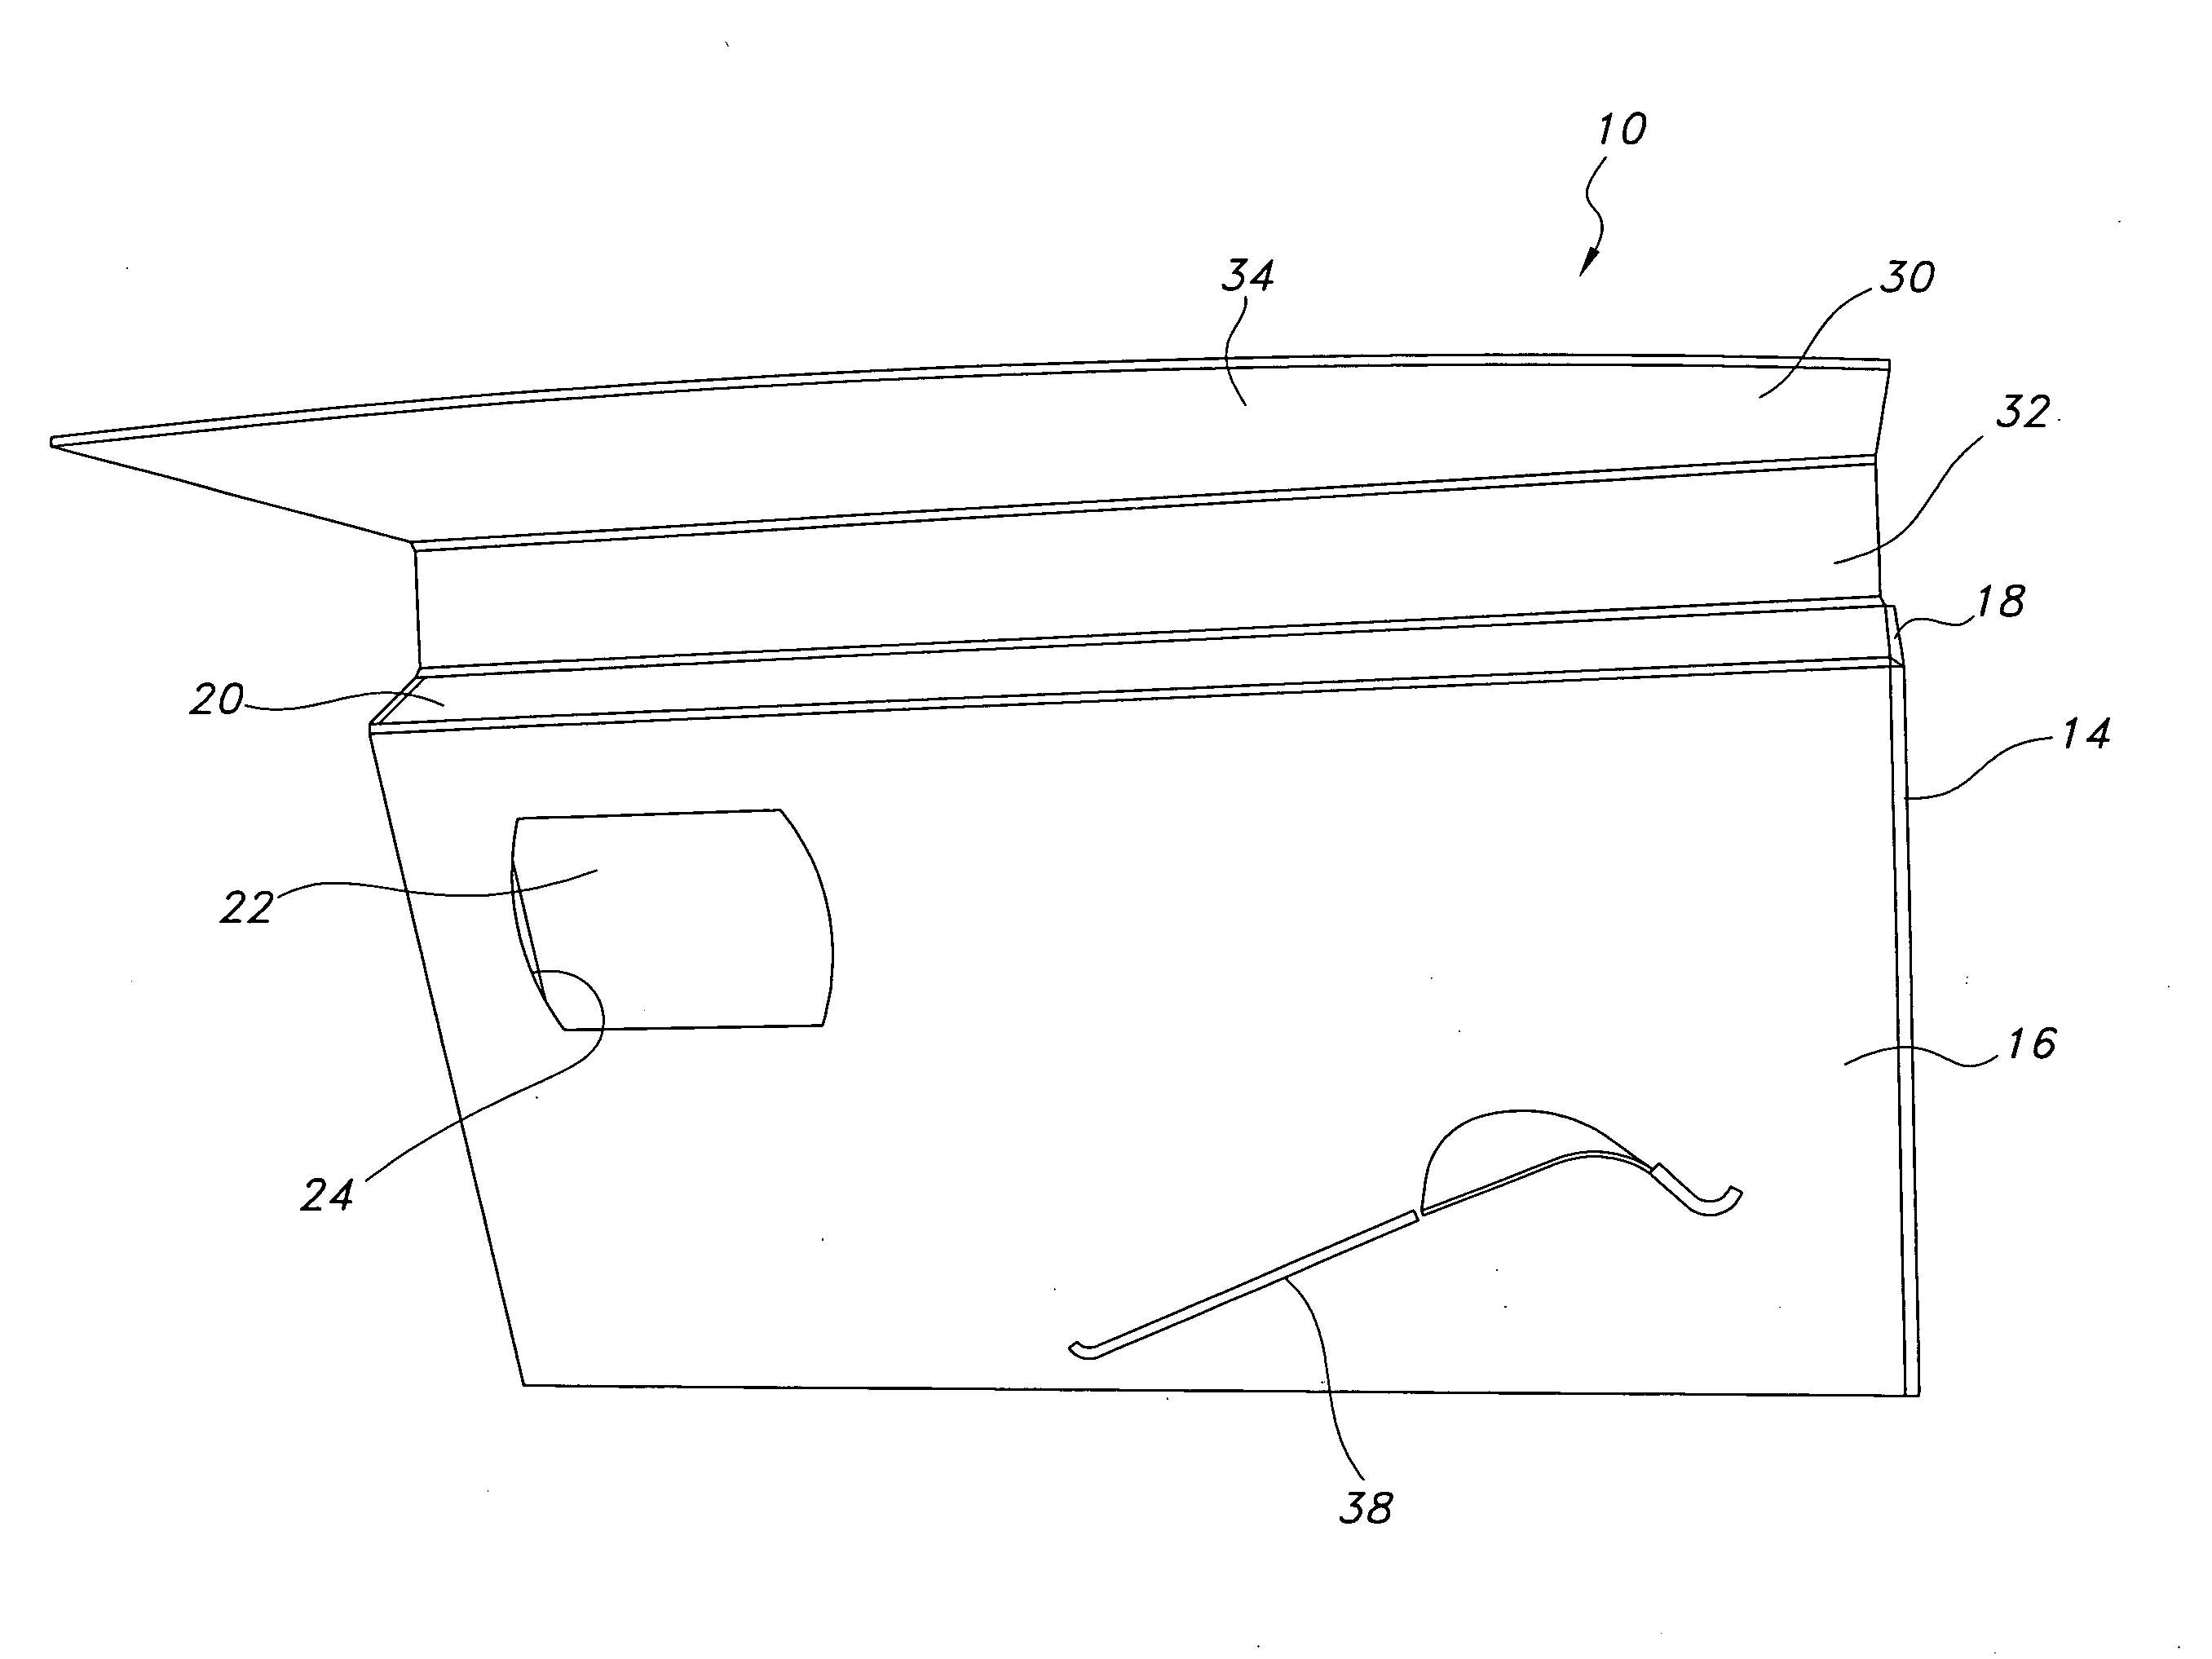 Package having a dispensing opening and fold over flap